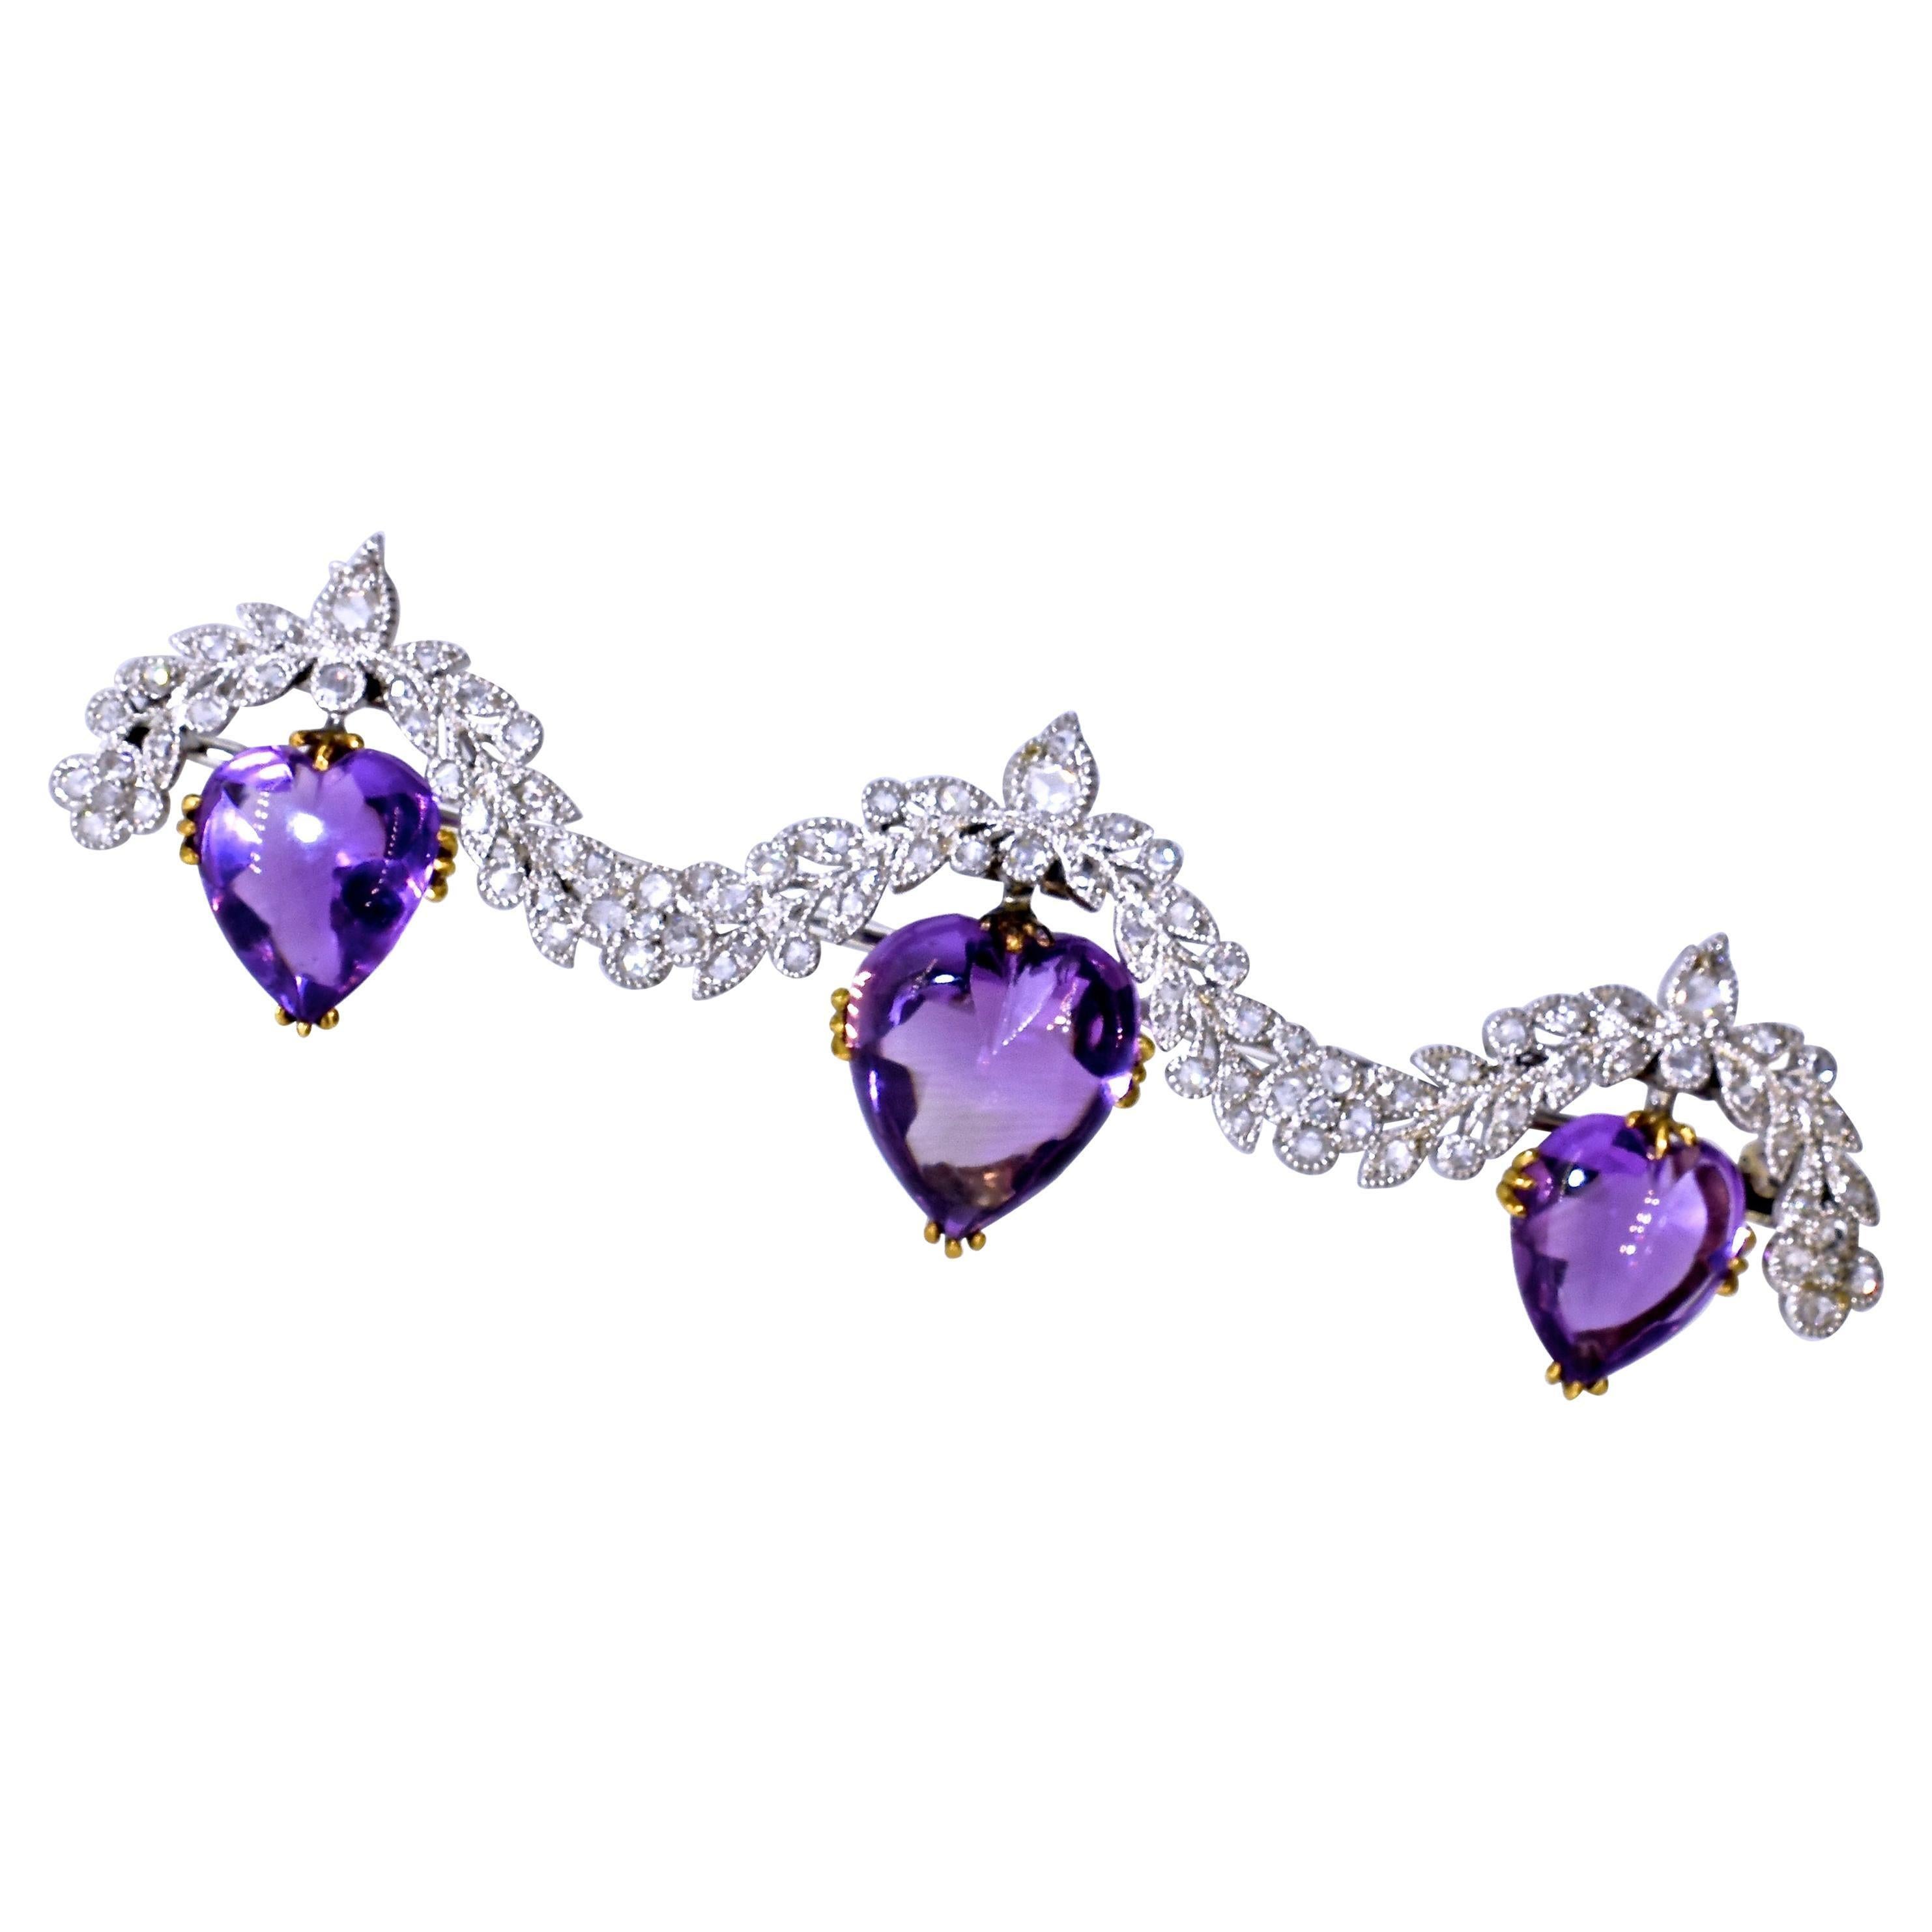 Rose Cut Antique Heart shaped Amethyst Brooch with Diamond, Edwardian, circa 1910 For Sale